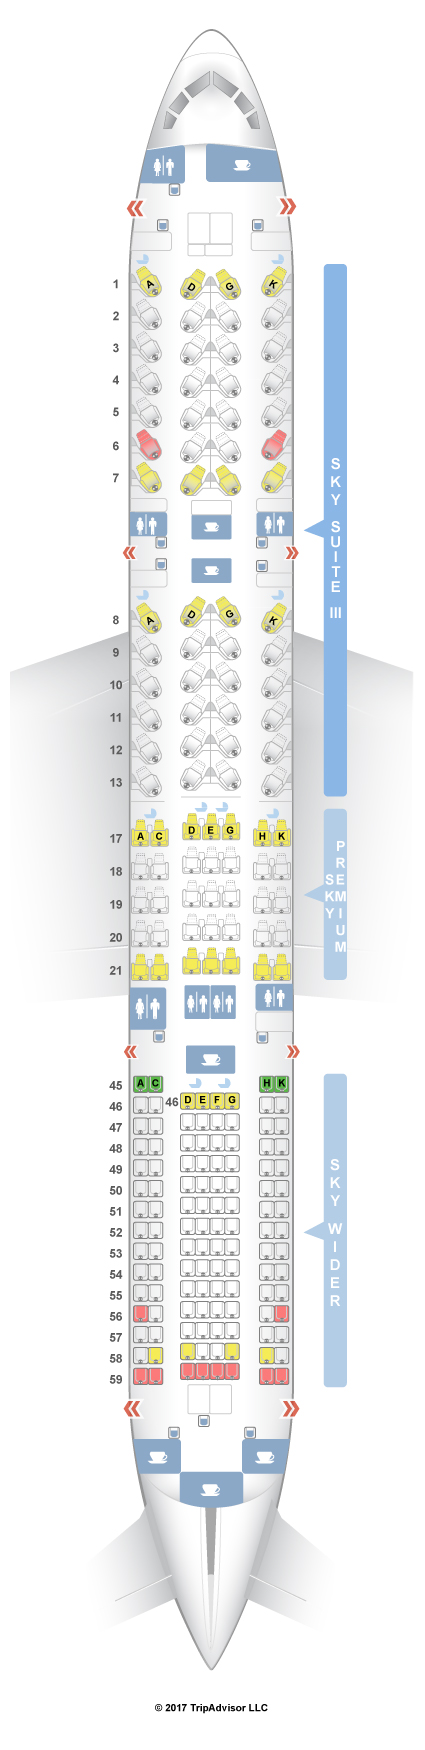 Aircraft 789 Seating Map | My XXX Hot Girl